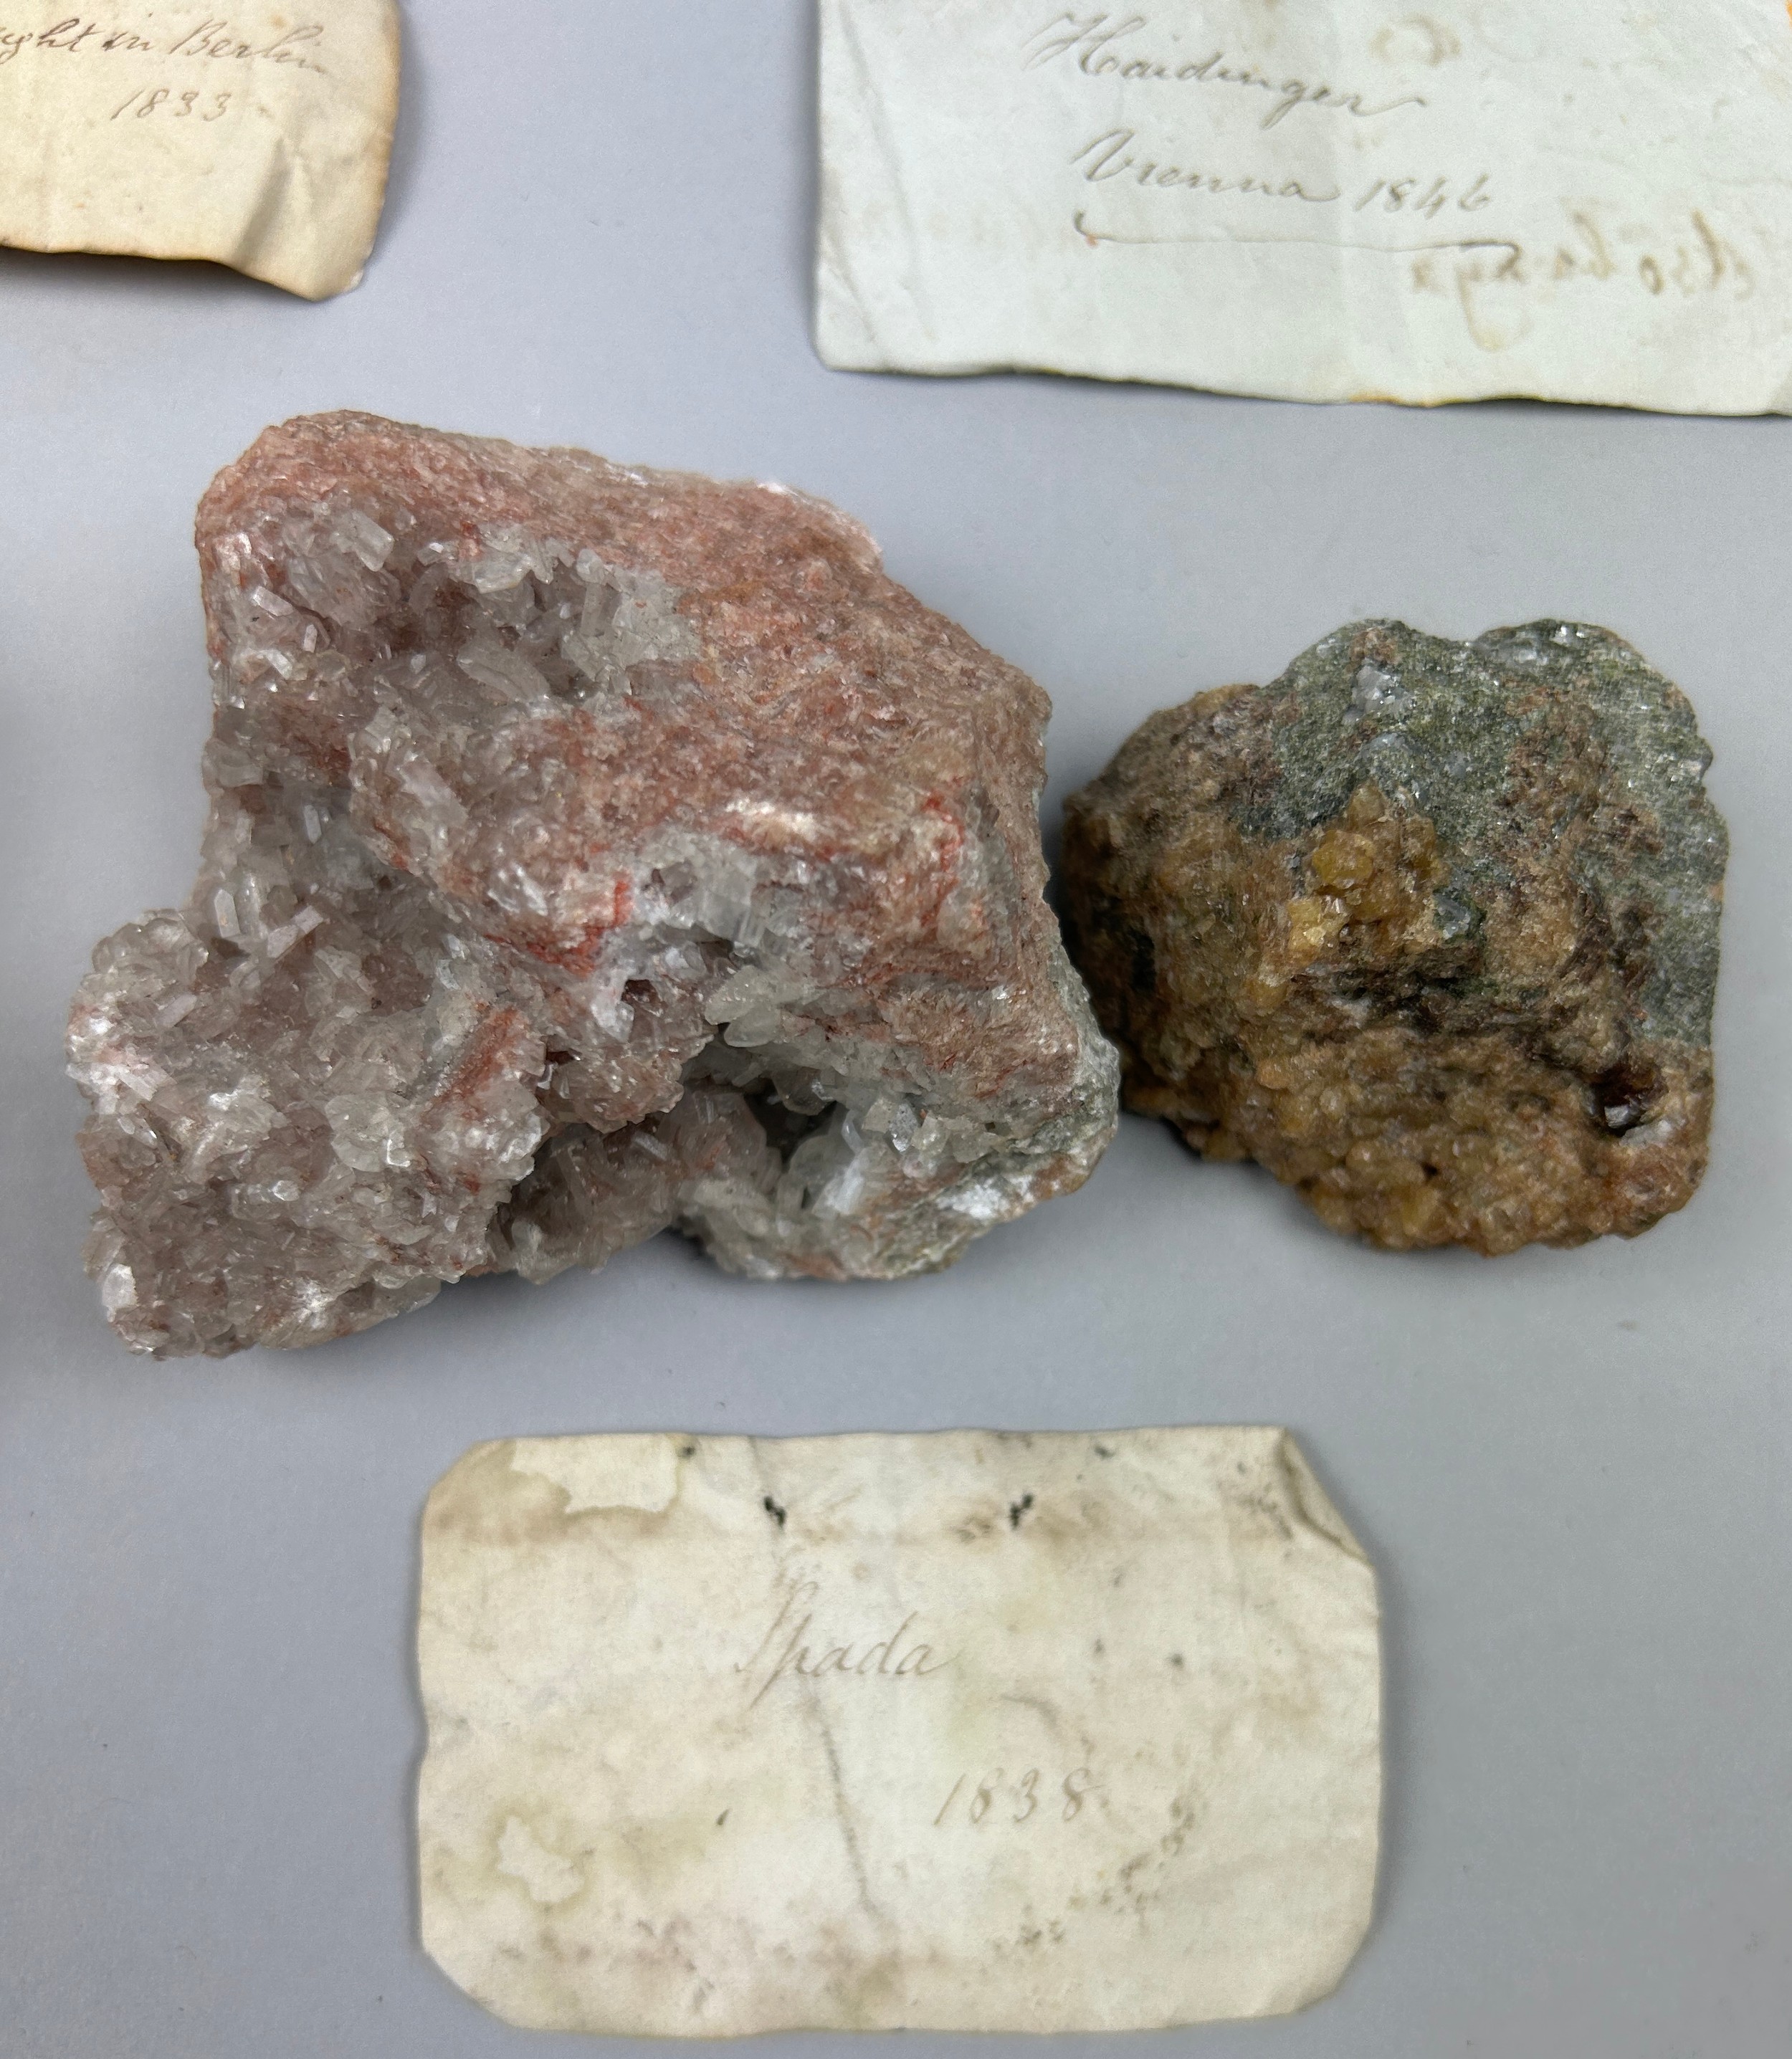 A RARE CABINET COLLECTION OF MINERALS CIRCA 1810-1860, including minerals probably collected by - Image 12 of 33